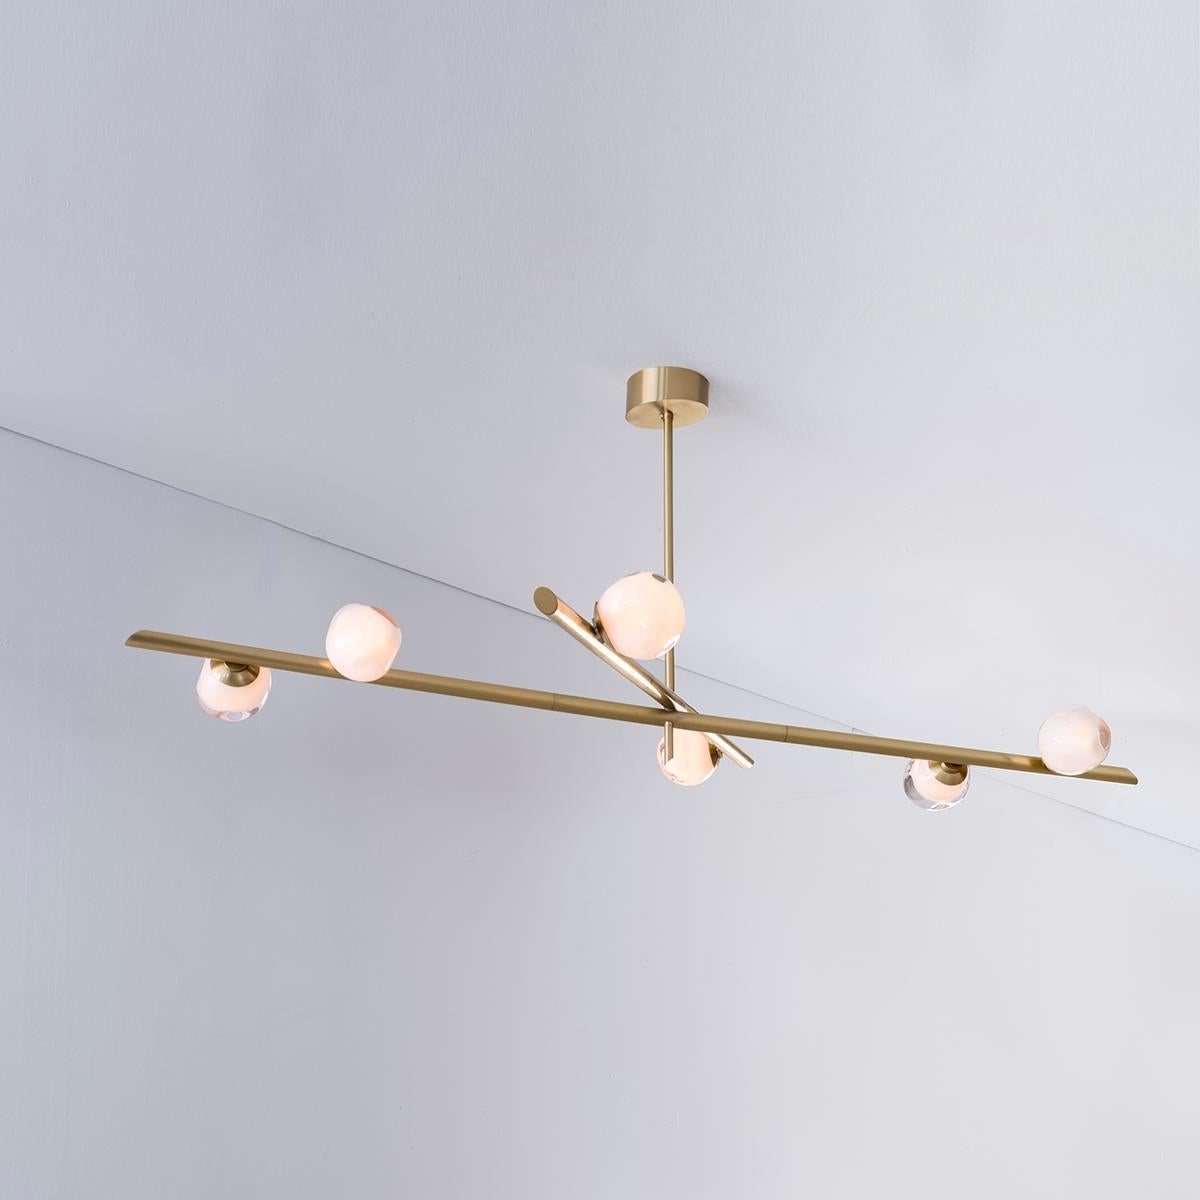 Italian Antares Ceiling Light by Gaspare Asaro-Polished Brass Finish For Sale